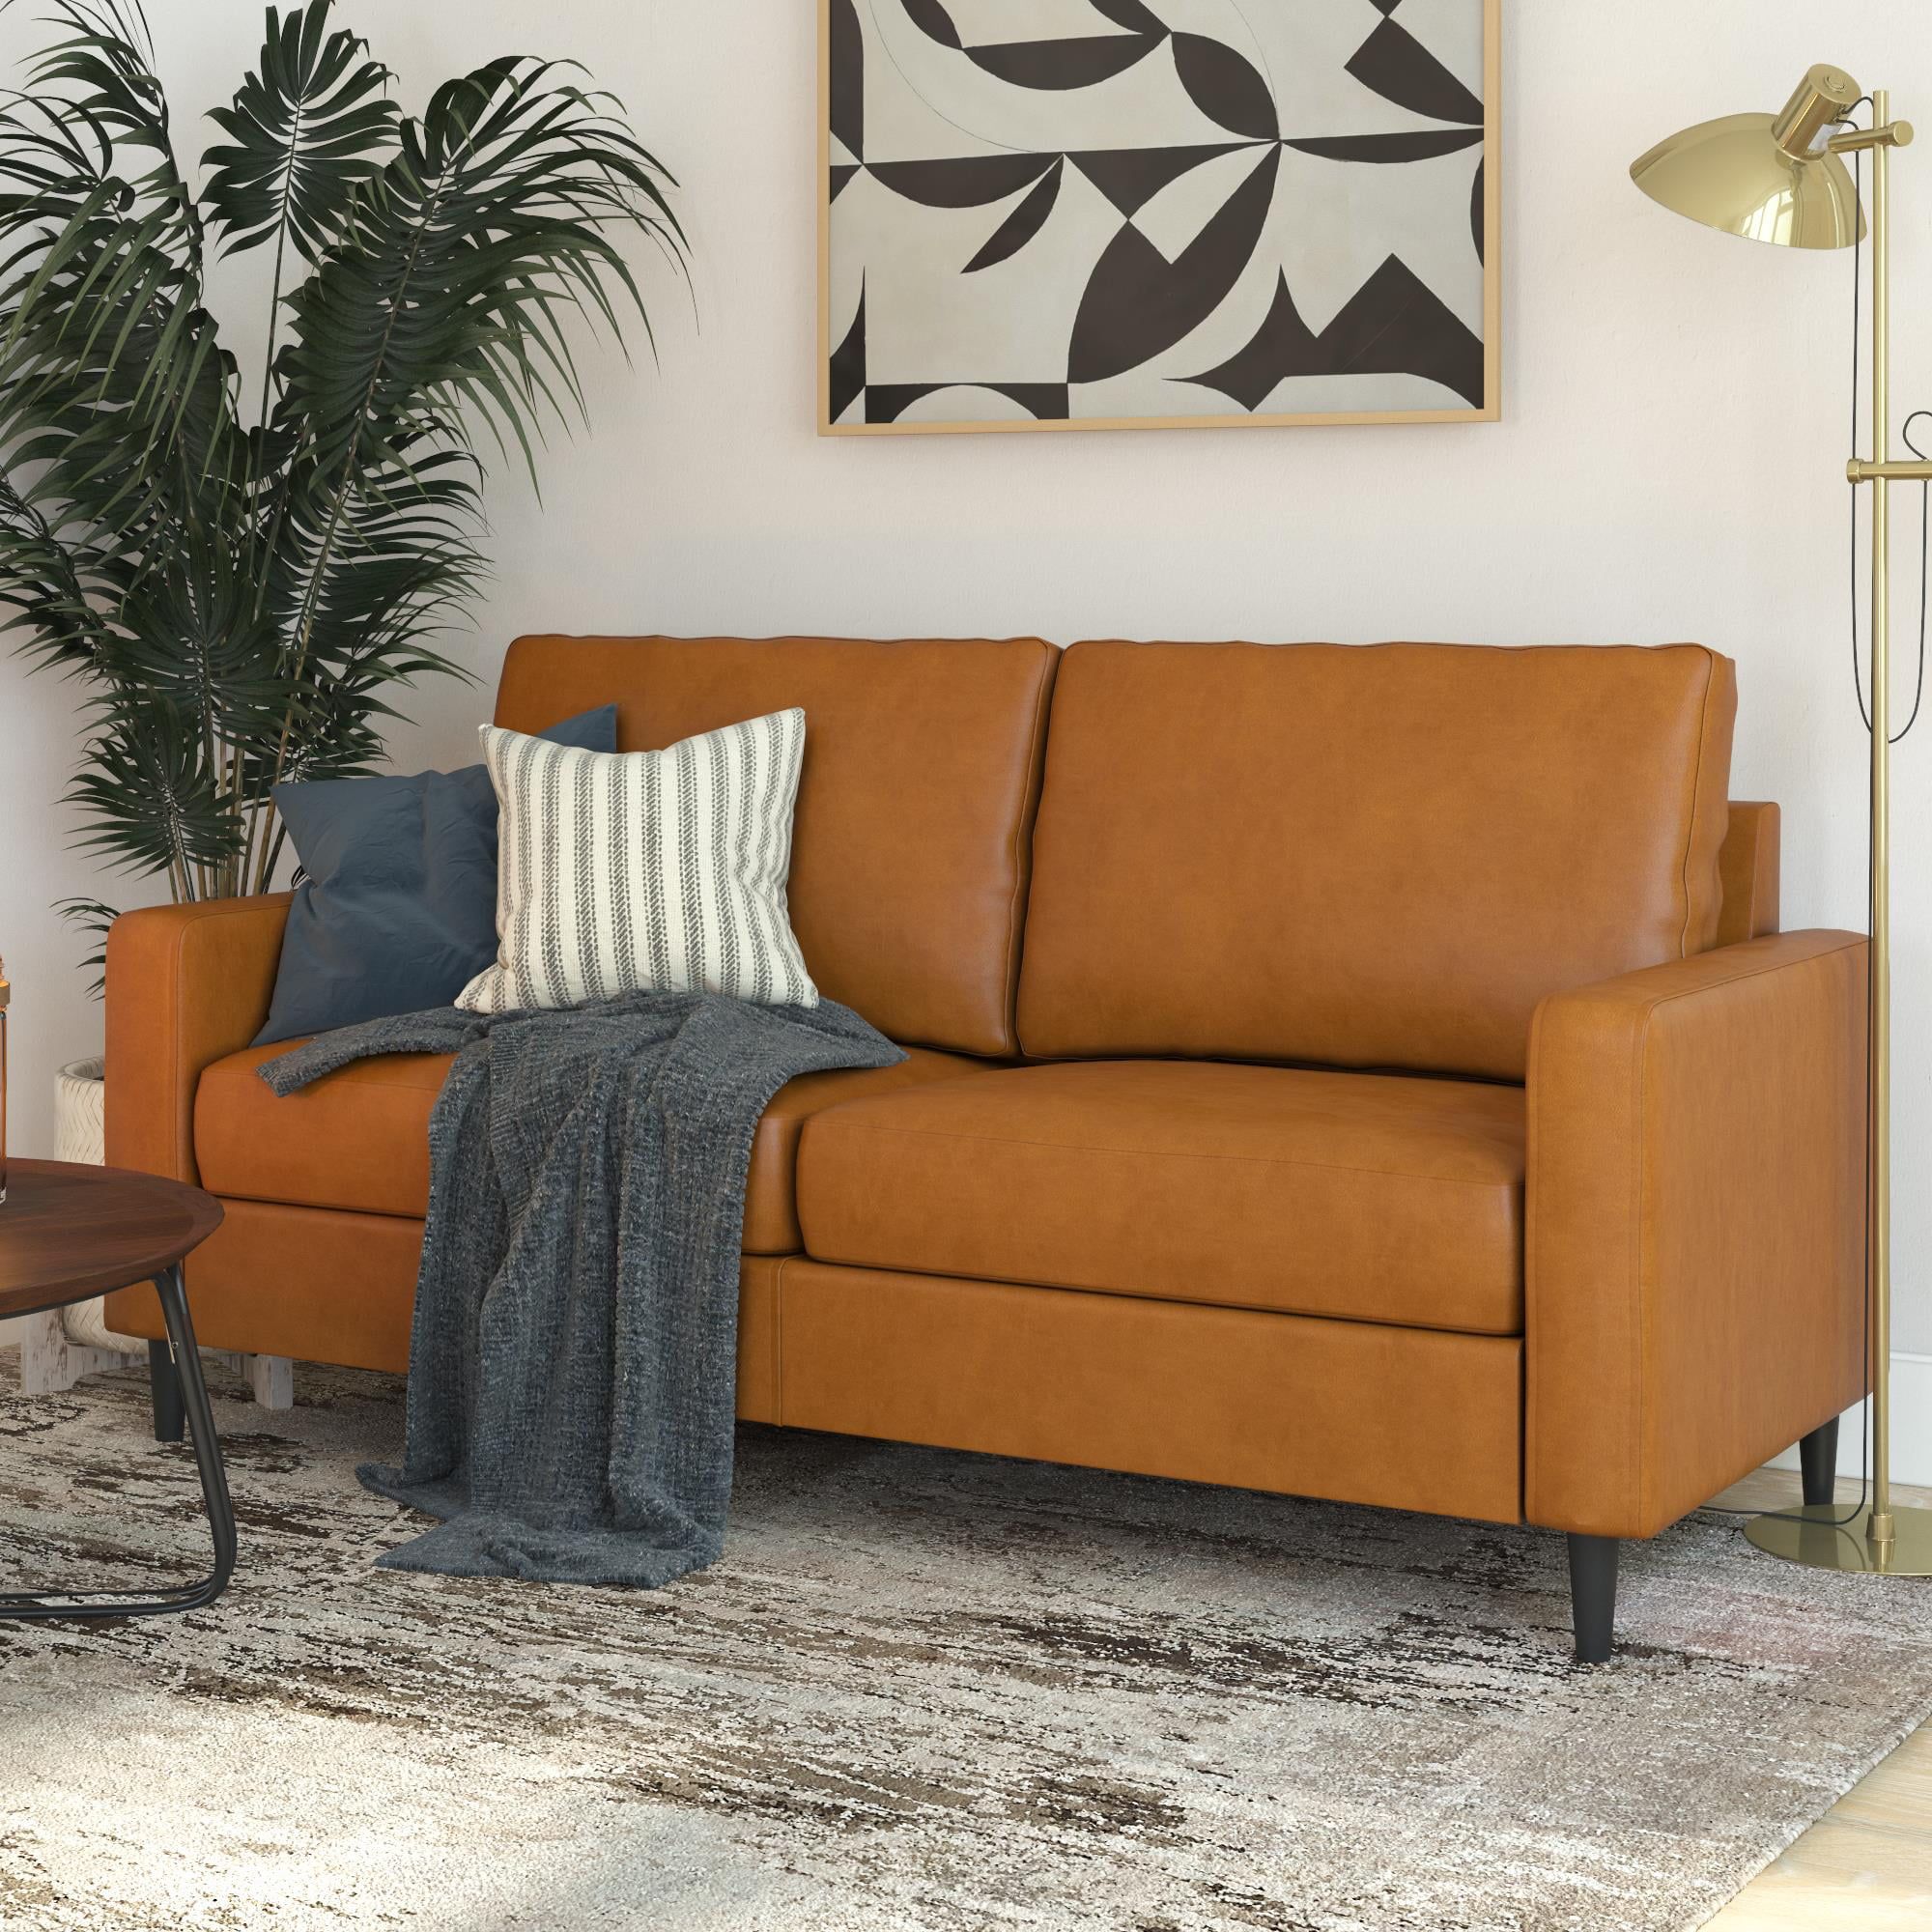 Dhp Connor Modern Sofa, Small Space Living Room Furniture, Camel Faux With Sofas For Small Spaces (View 7 of 20)